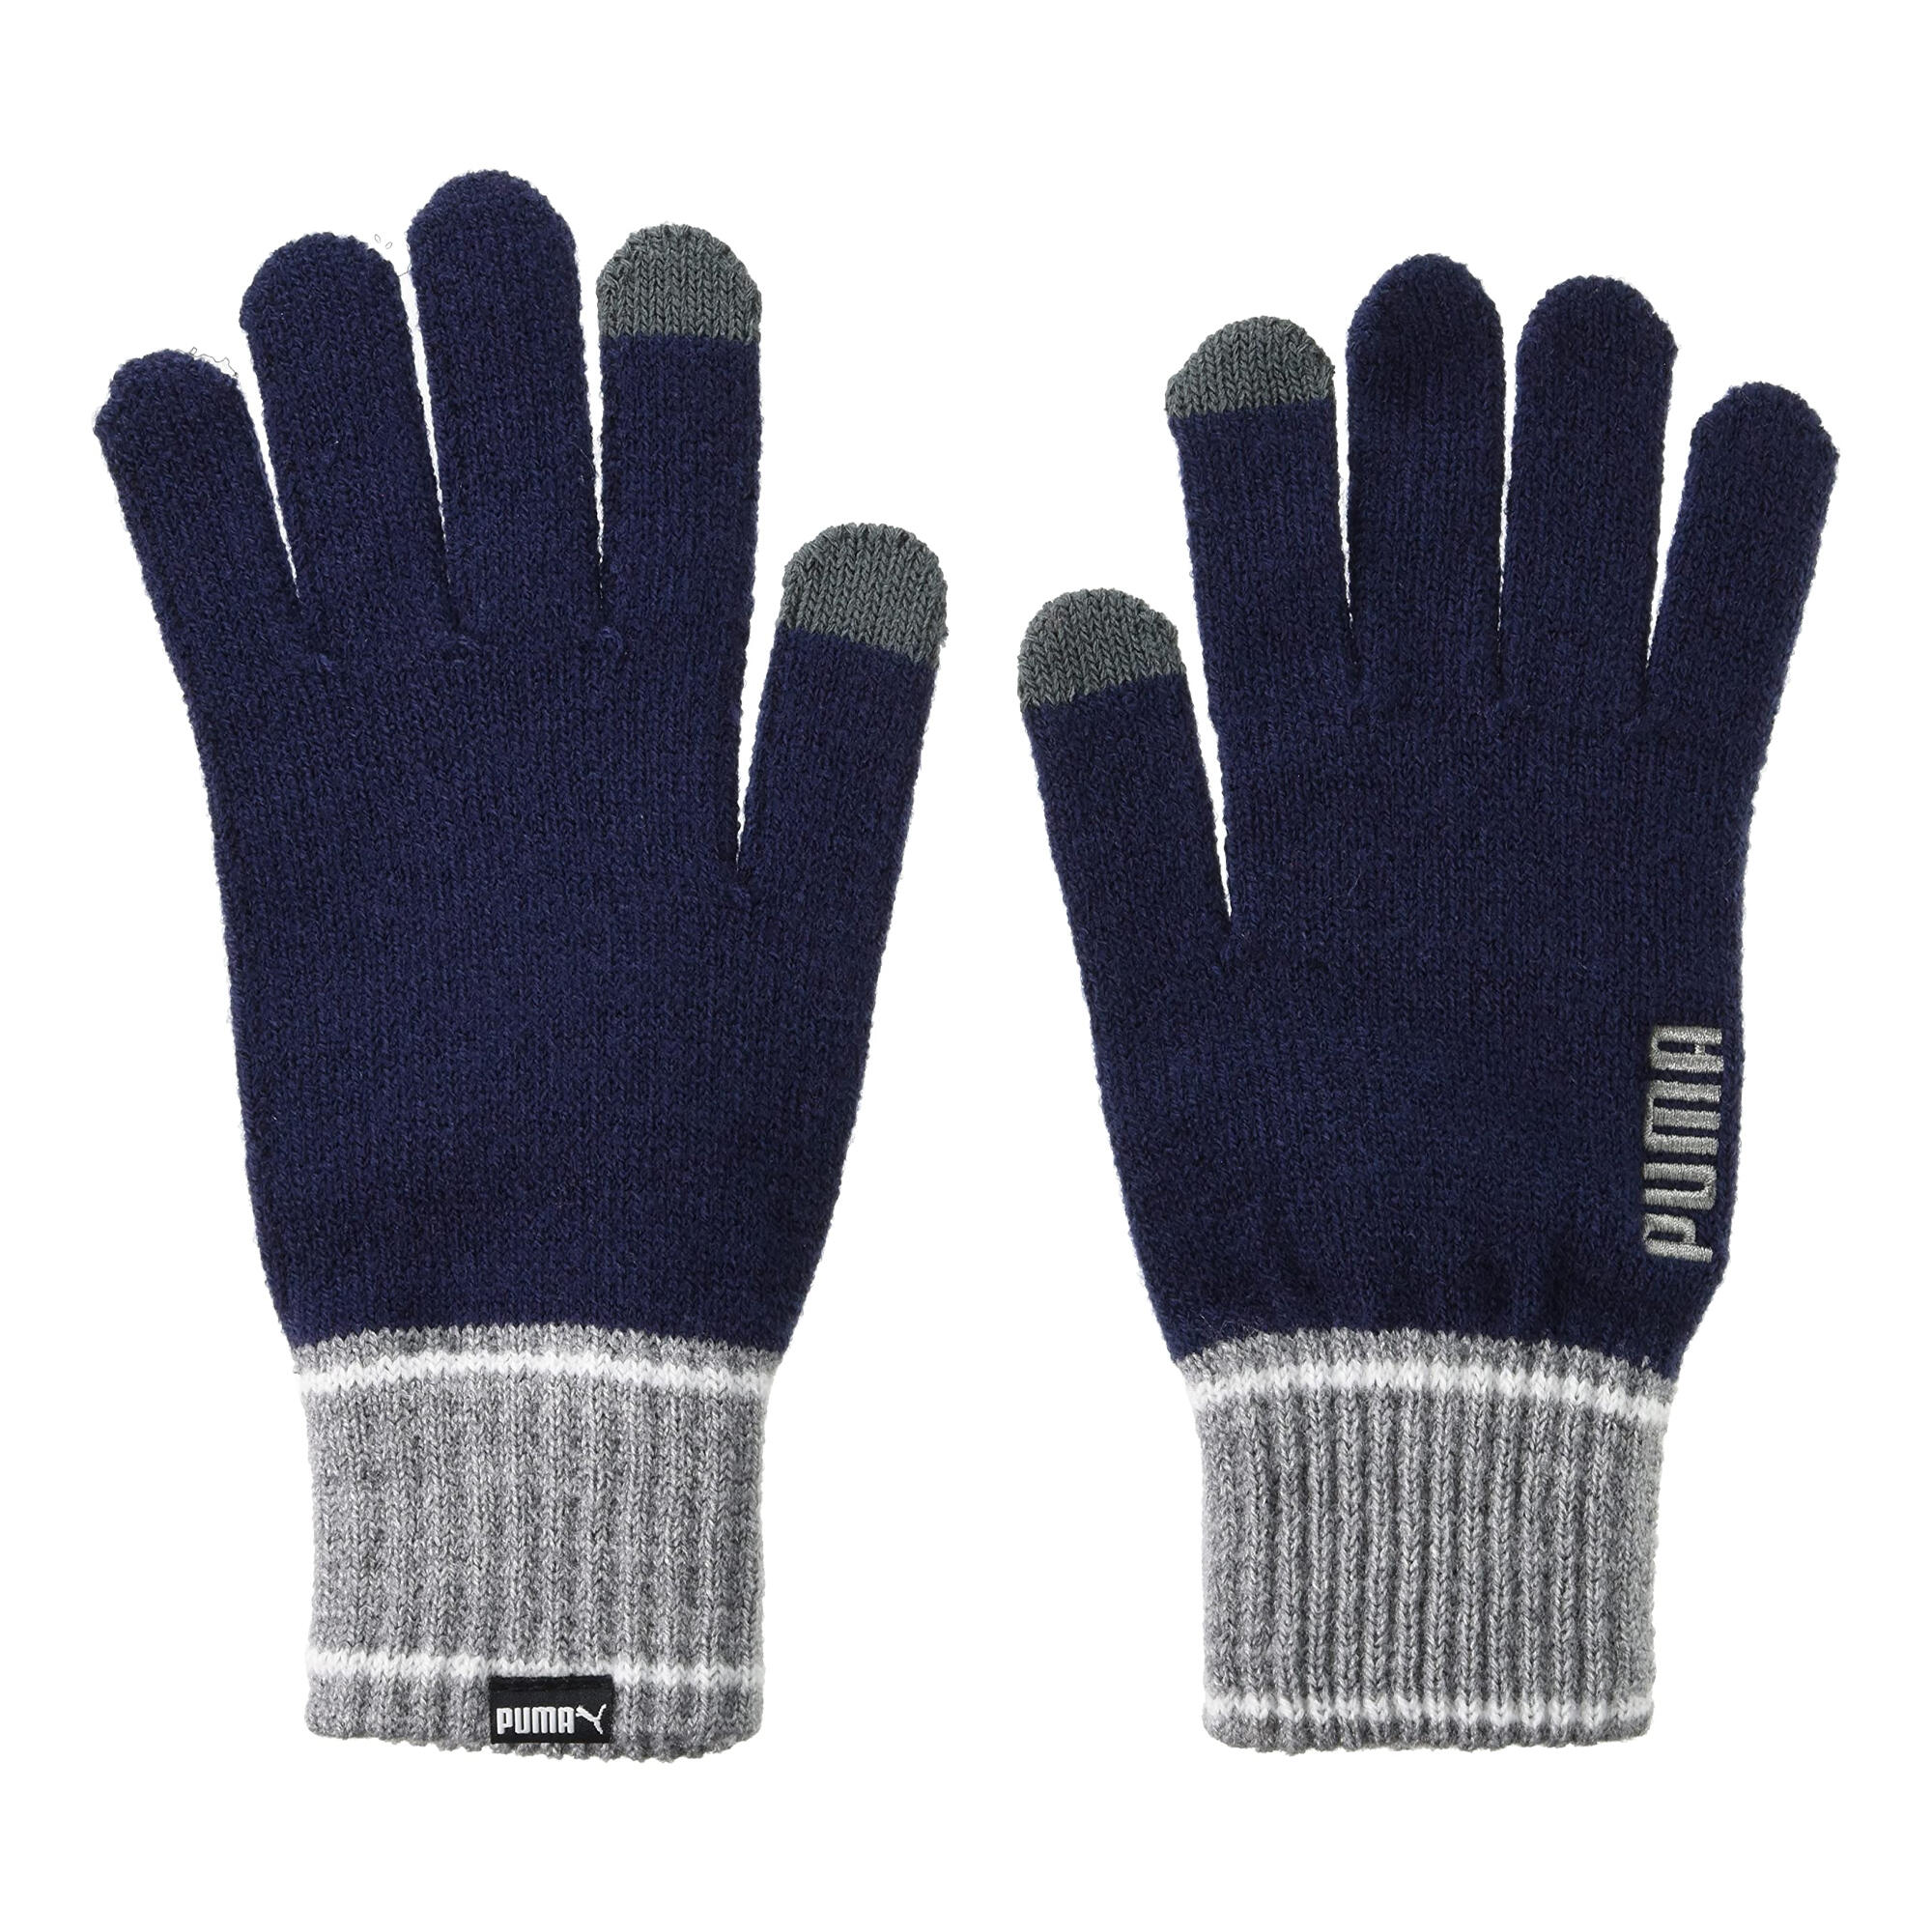 PUMA Unisex Adult Knitted Winter Gloves (Peacoat/Grey Heather)